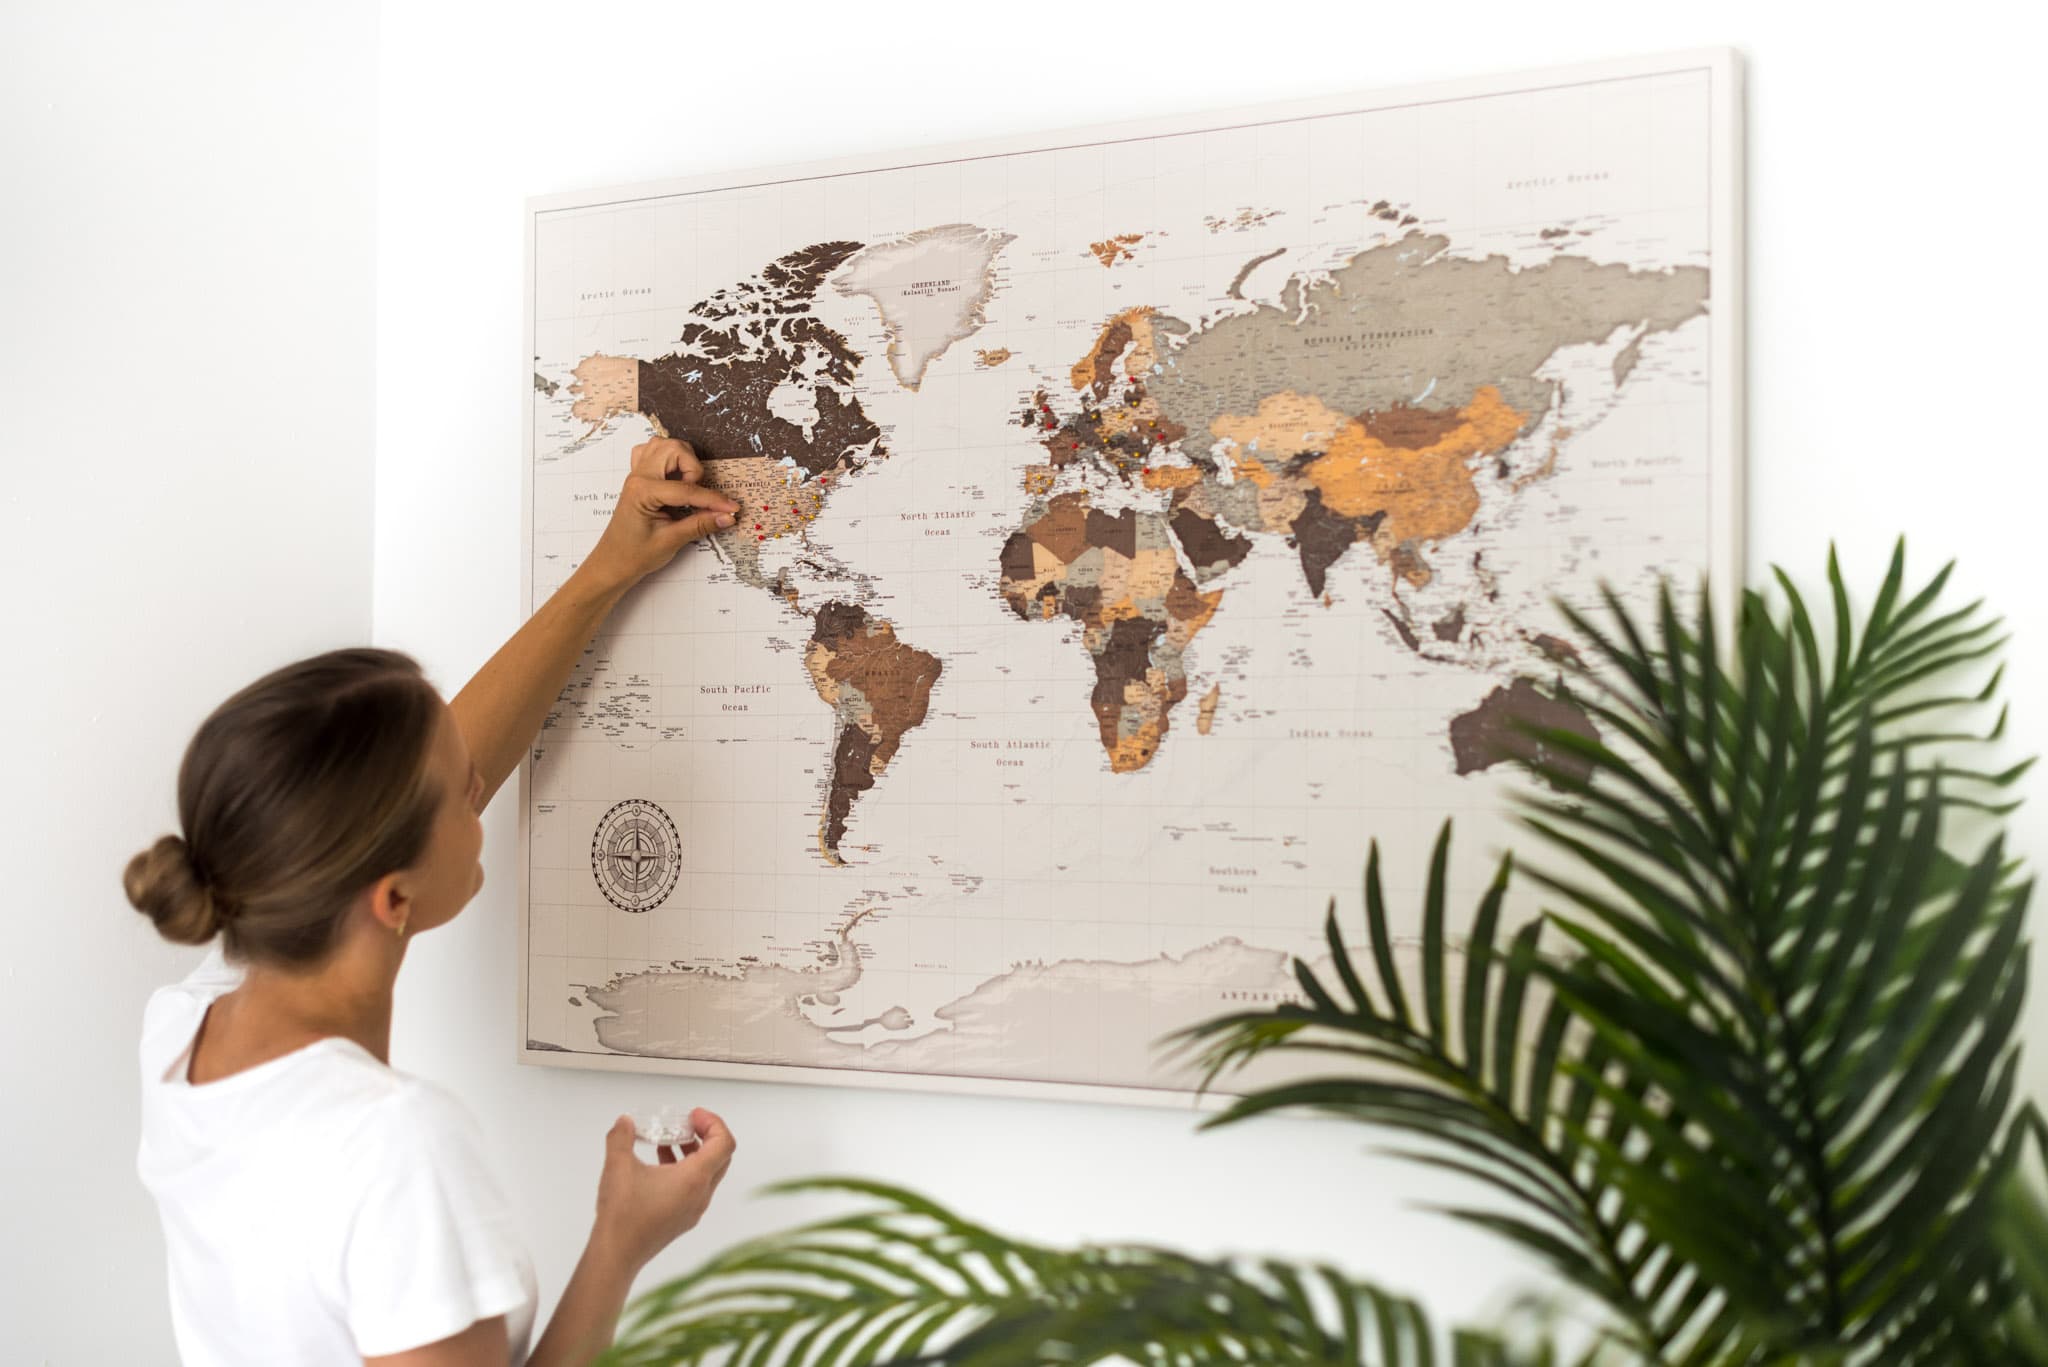 Best World Map to Mark Your Travels: All You Need to Know